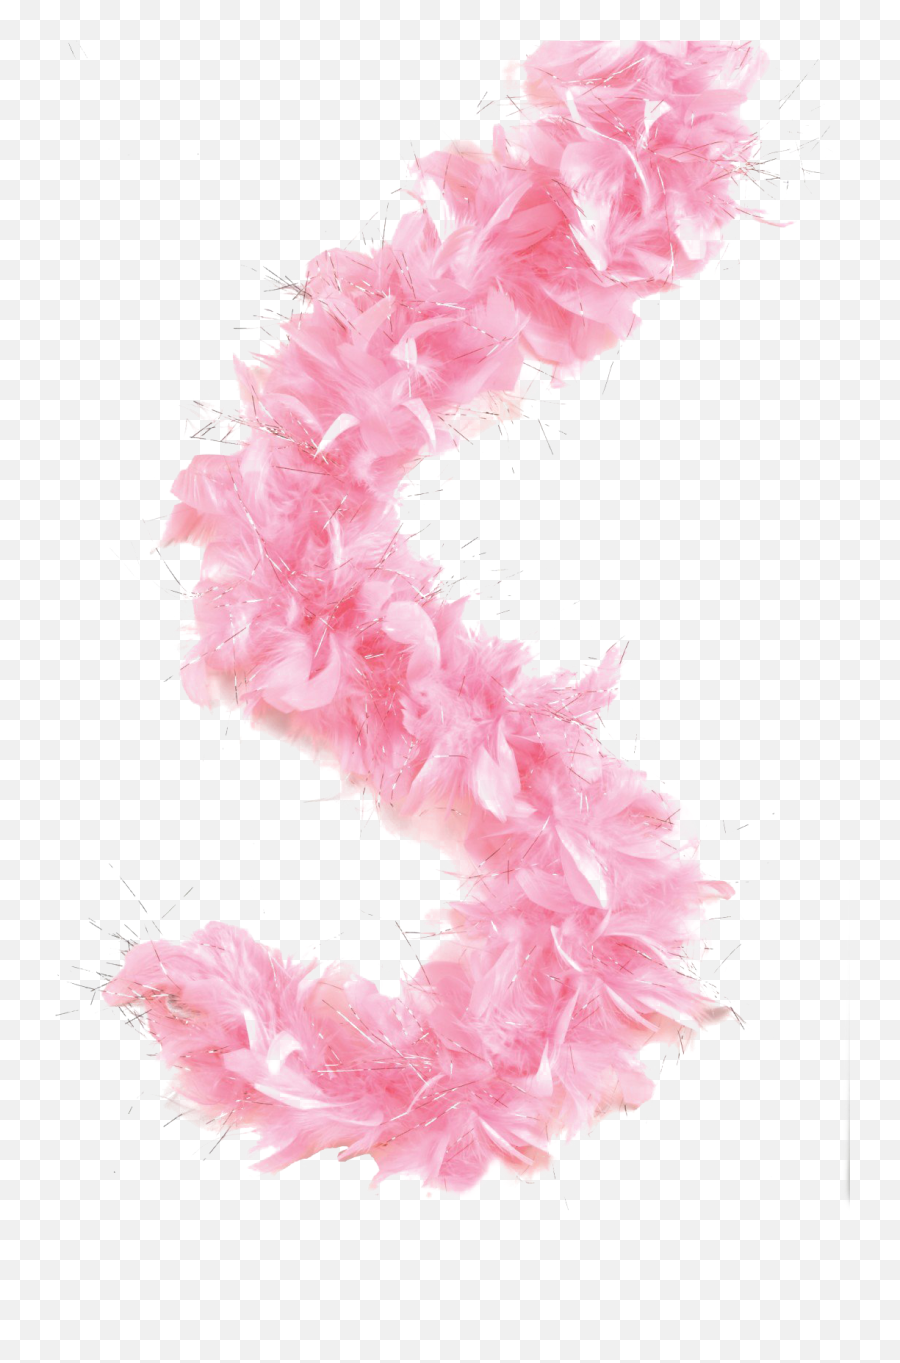 Feather Boa Png U0026 Free Feather Boapng Transparent Images - Pink Feather Boa Png Emoji,Feather Emoji